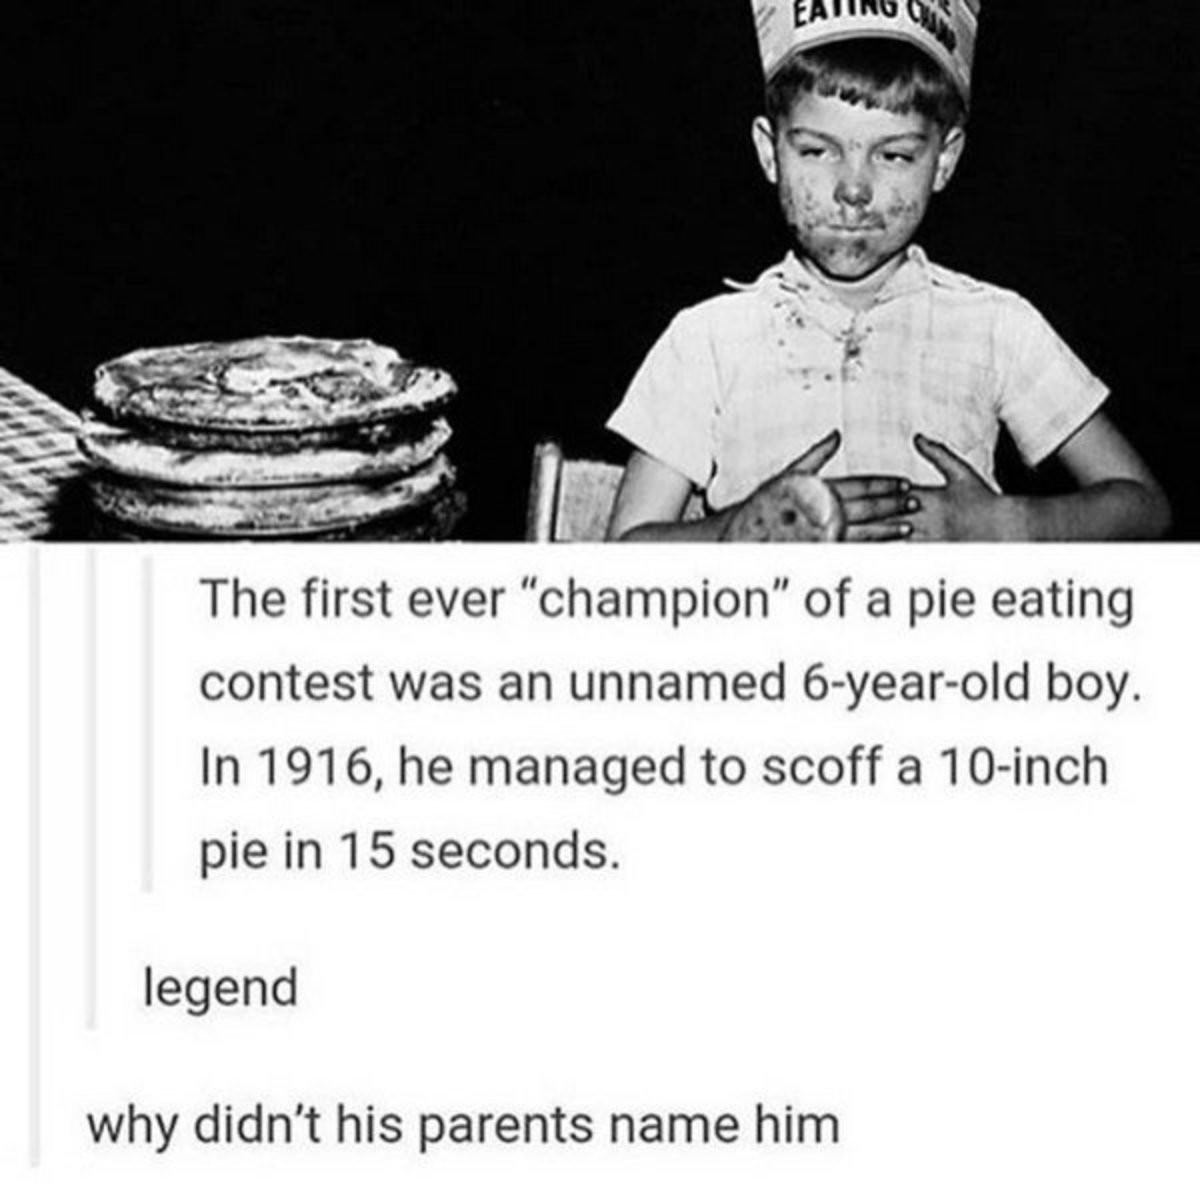 first pie eating contest - Eating The first ever "champion" of a pie eating contest was an unnamed 6yearold boy. In 1916, he managed to scoff a 10inch pie in 15 seconds. legend why didn't his parents name him